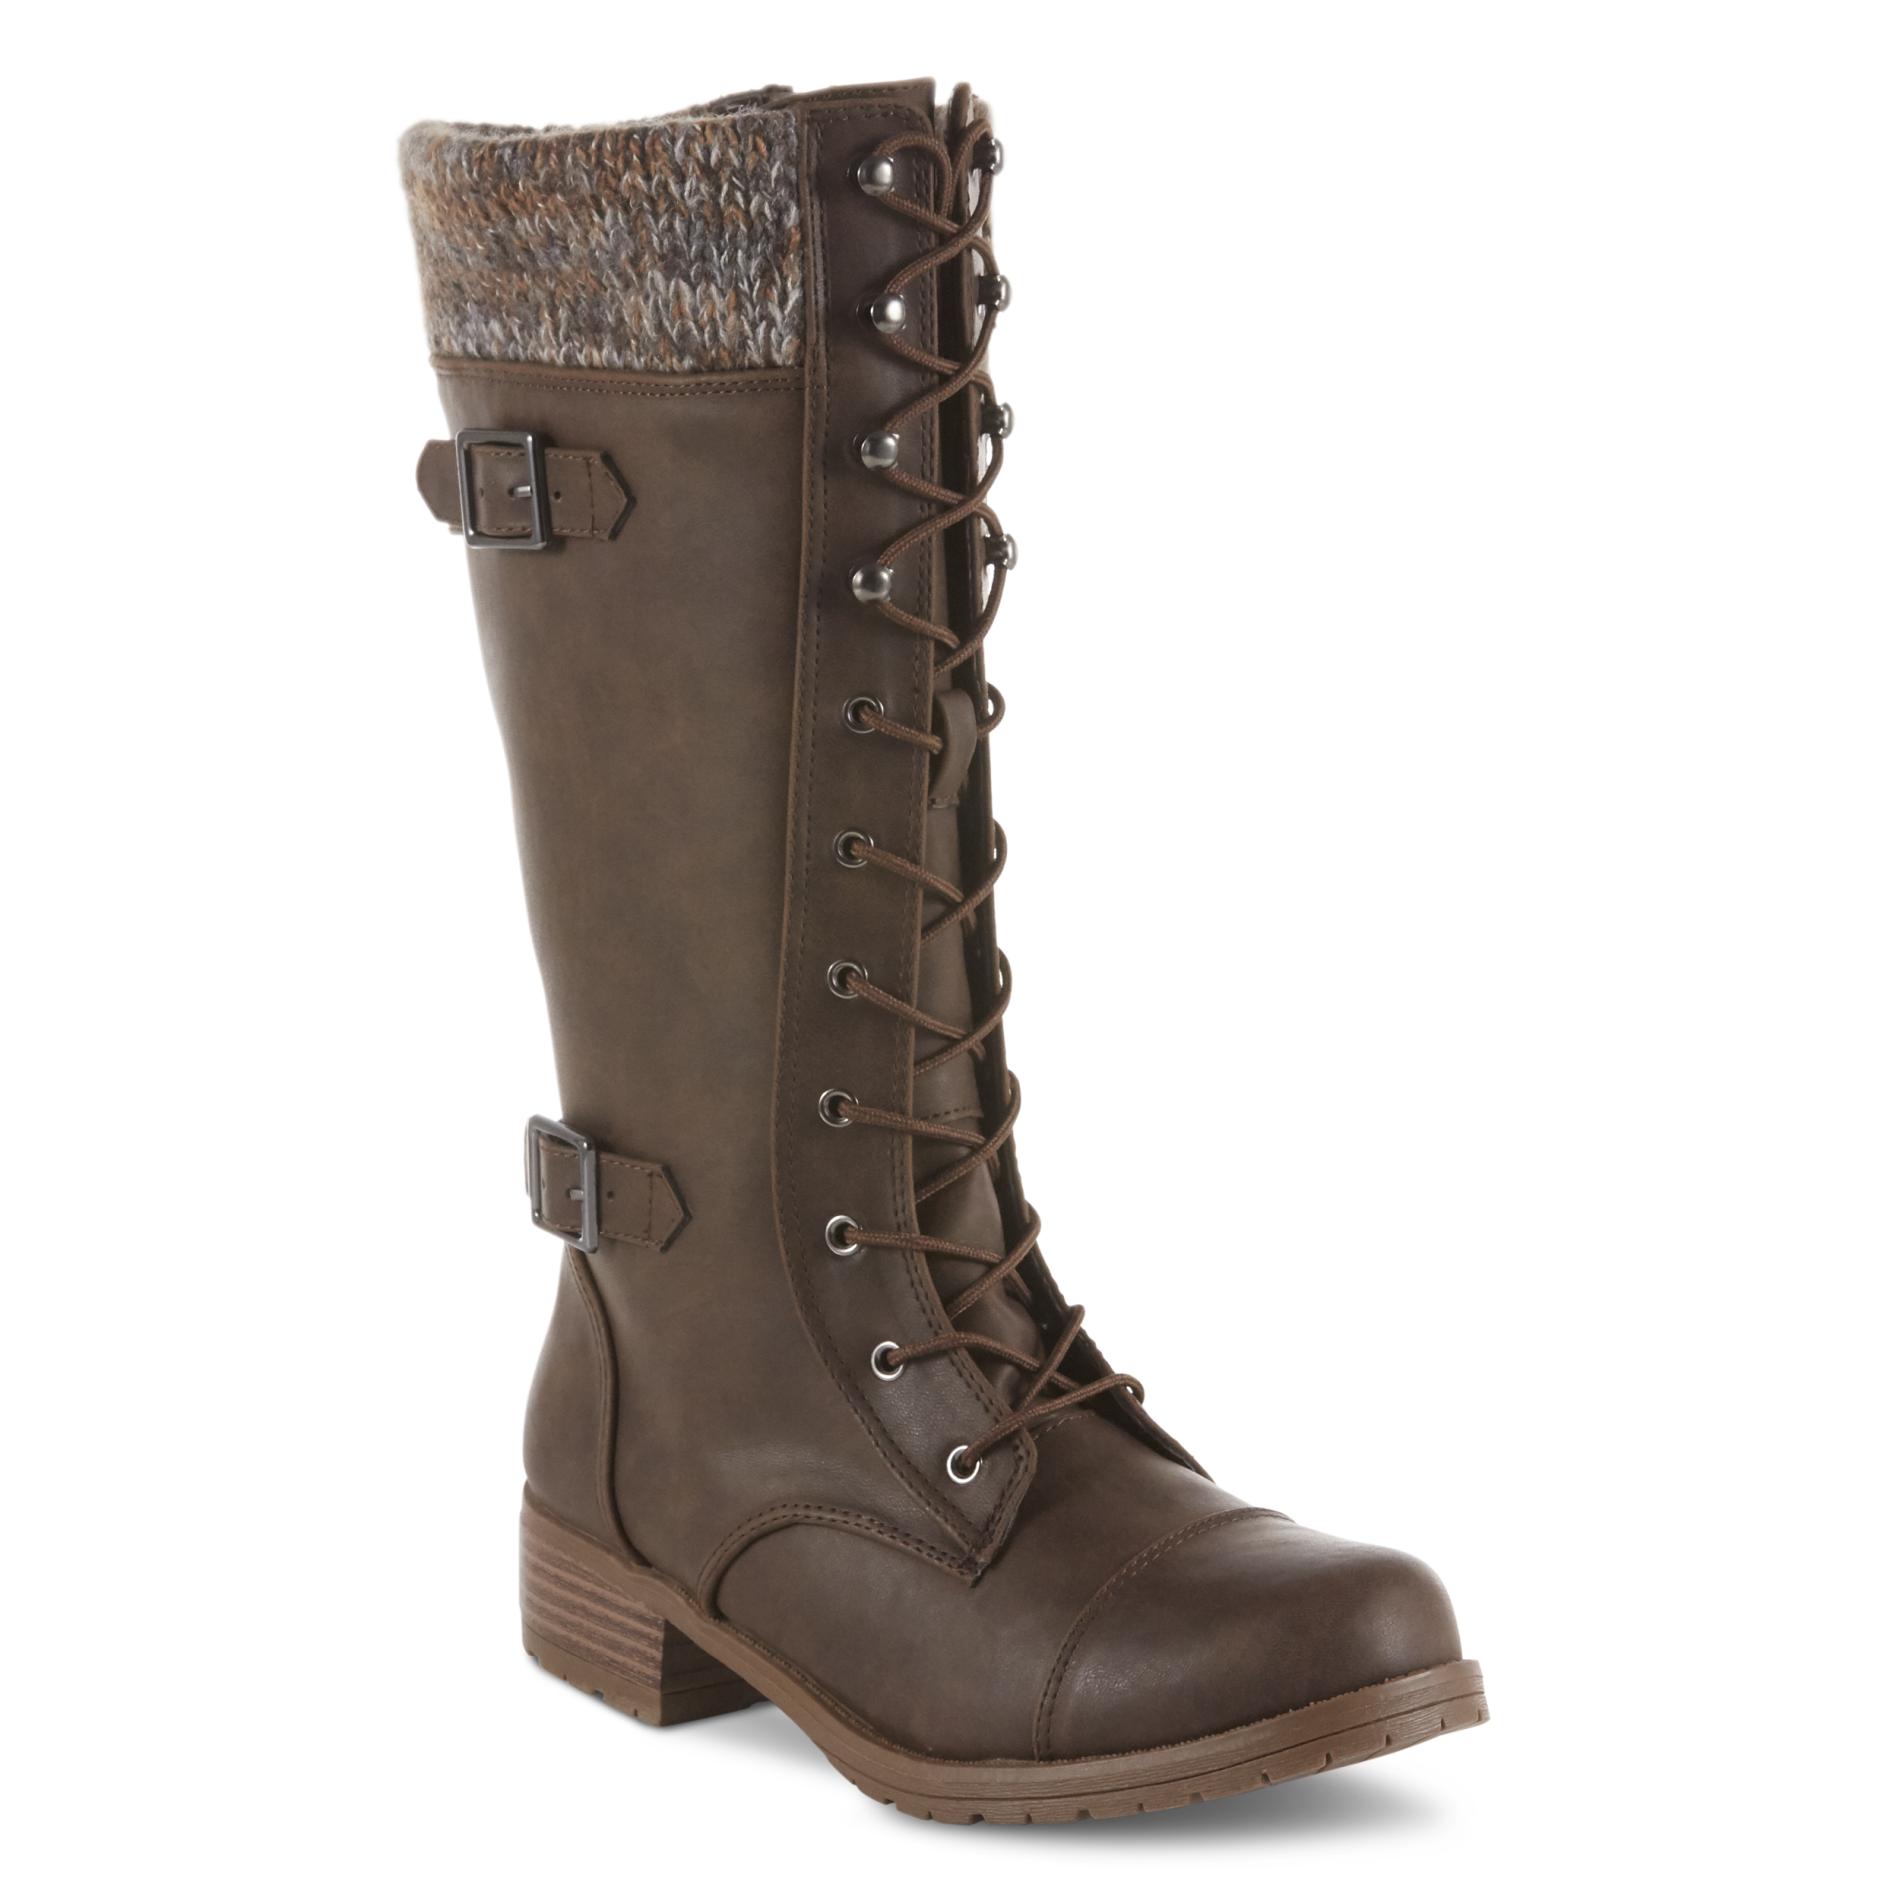 Route 66 Juniors' Darby Knee-High Fashion Boot - Brown